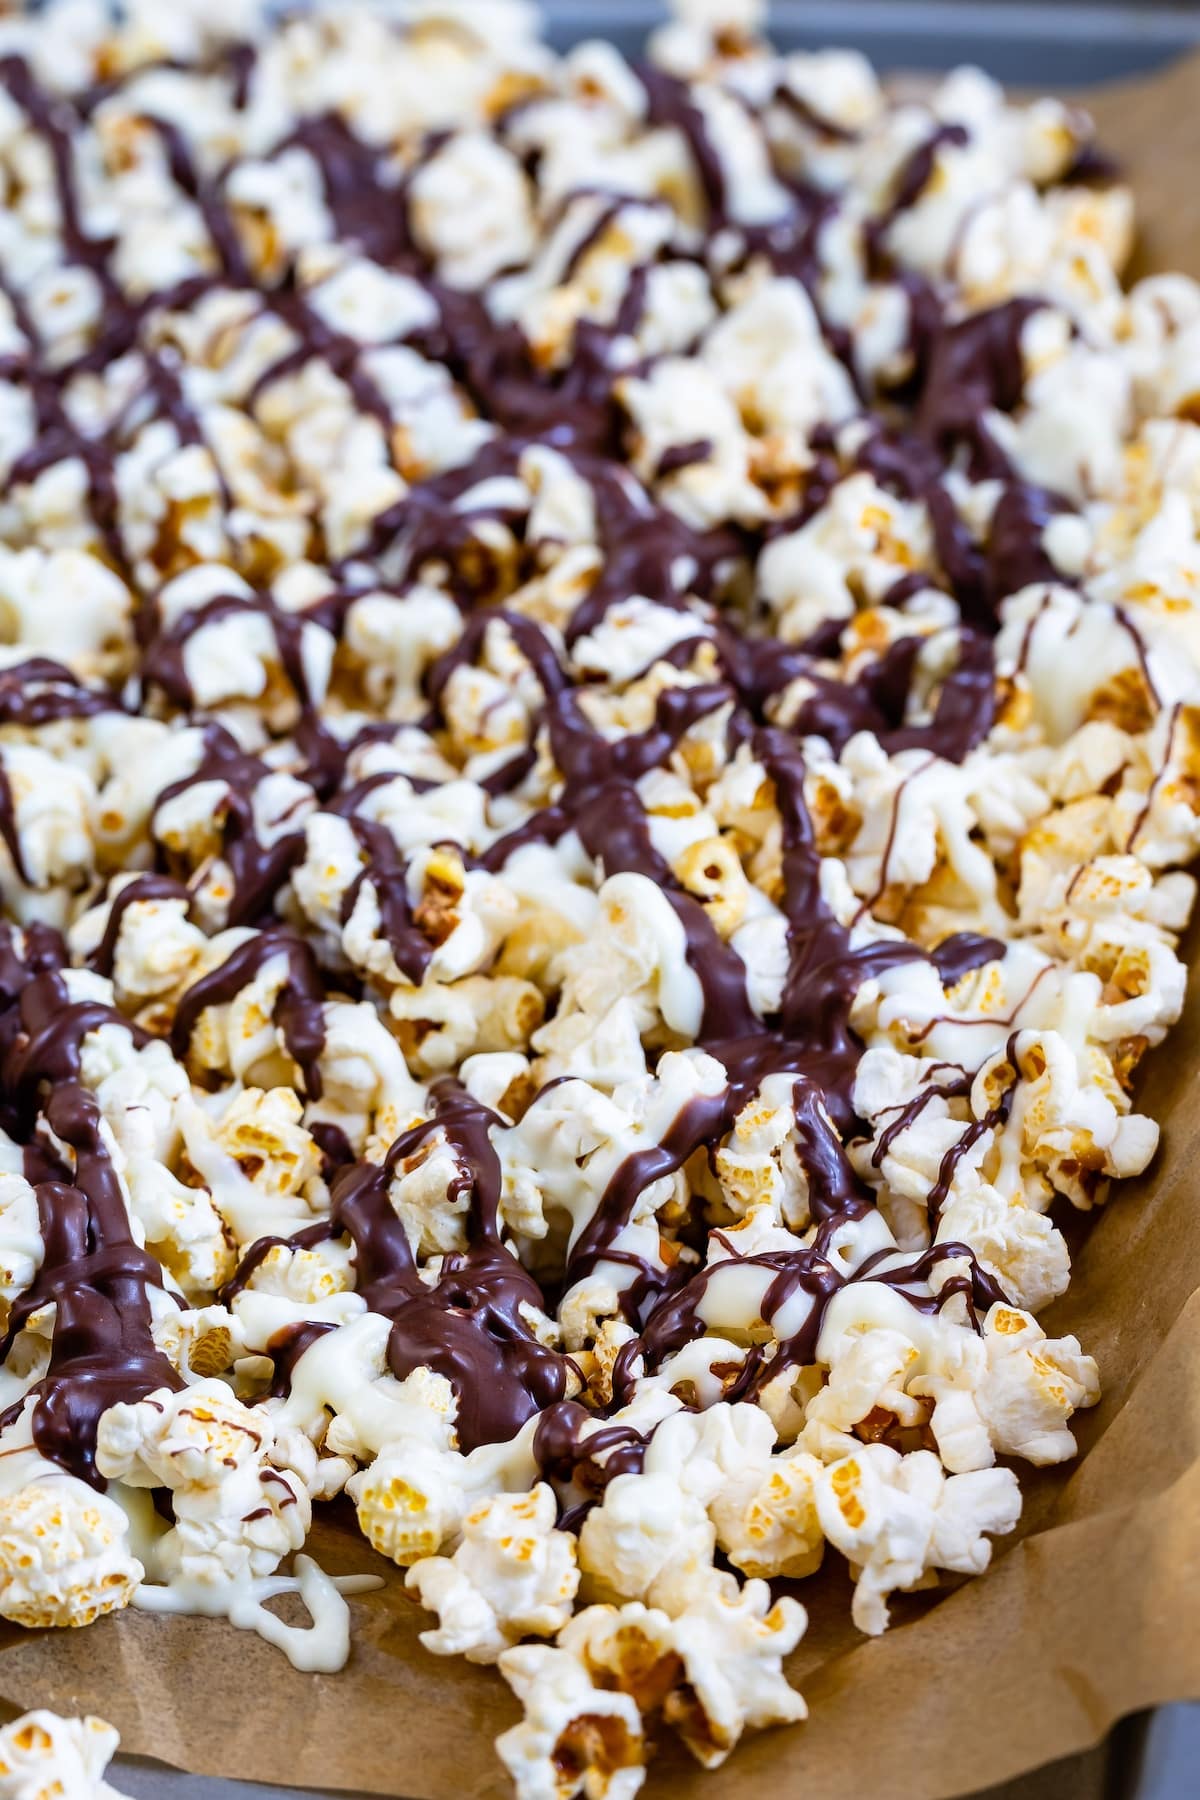 popcorn on a baking sheet covered in chocolate drizzle.